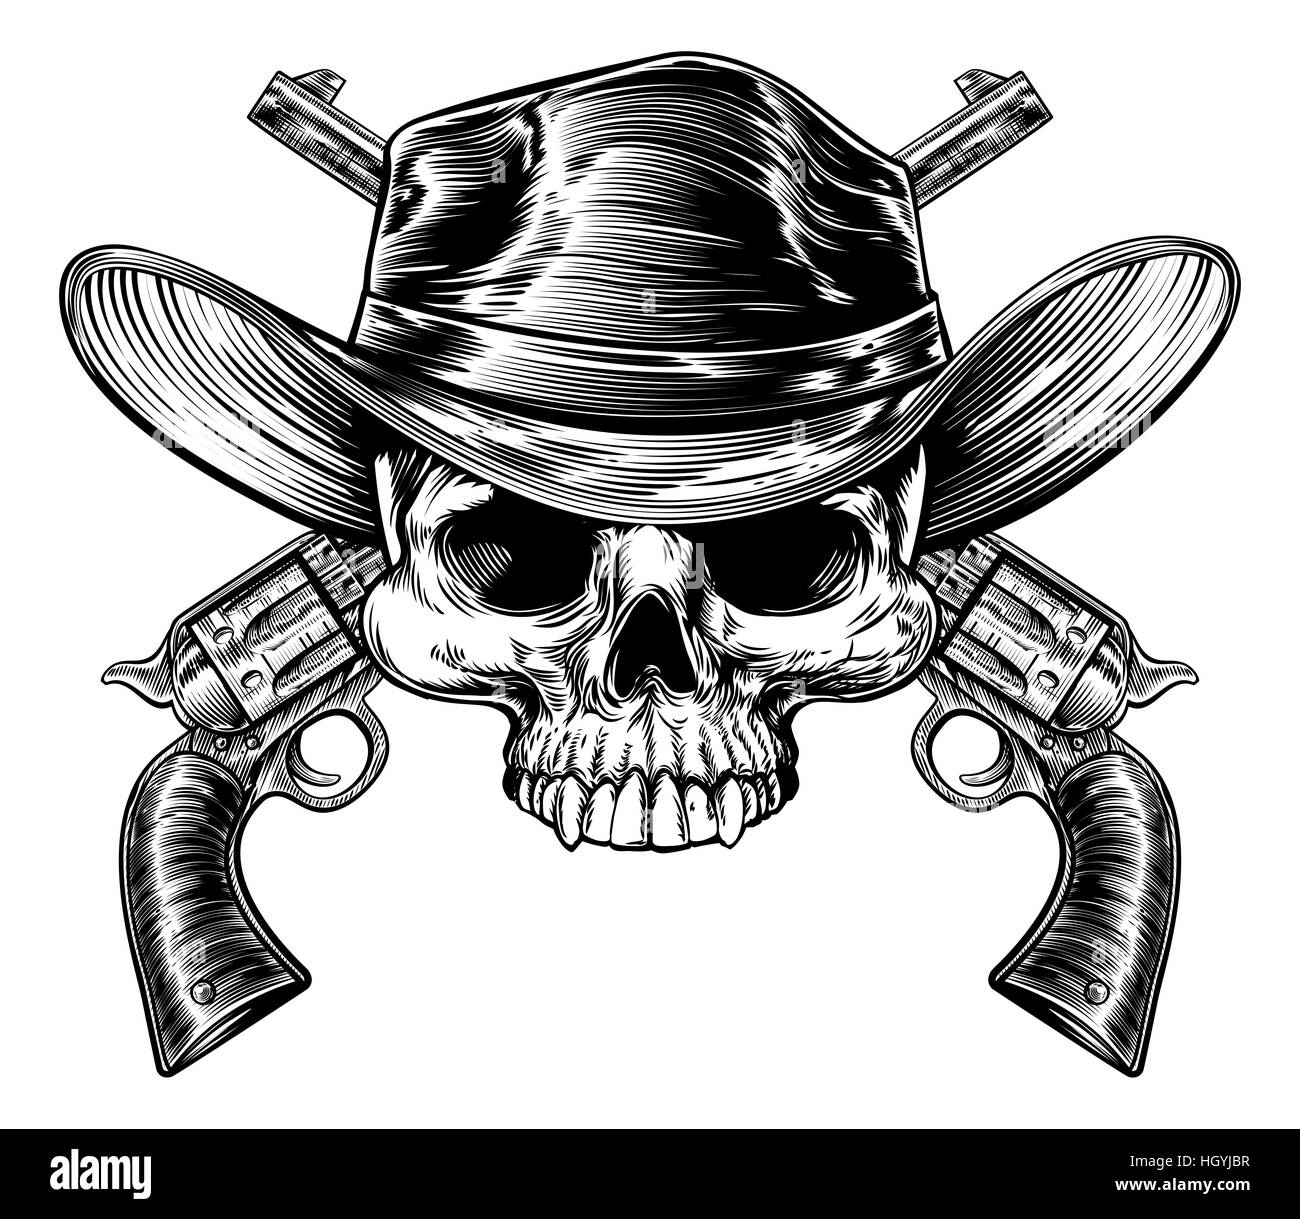 Cowboy skull in a western hat and a pair of crossed gun revolver handgun six shooter pistols drawn in a vintage retro woodcut etched or engraved style Stock Photo